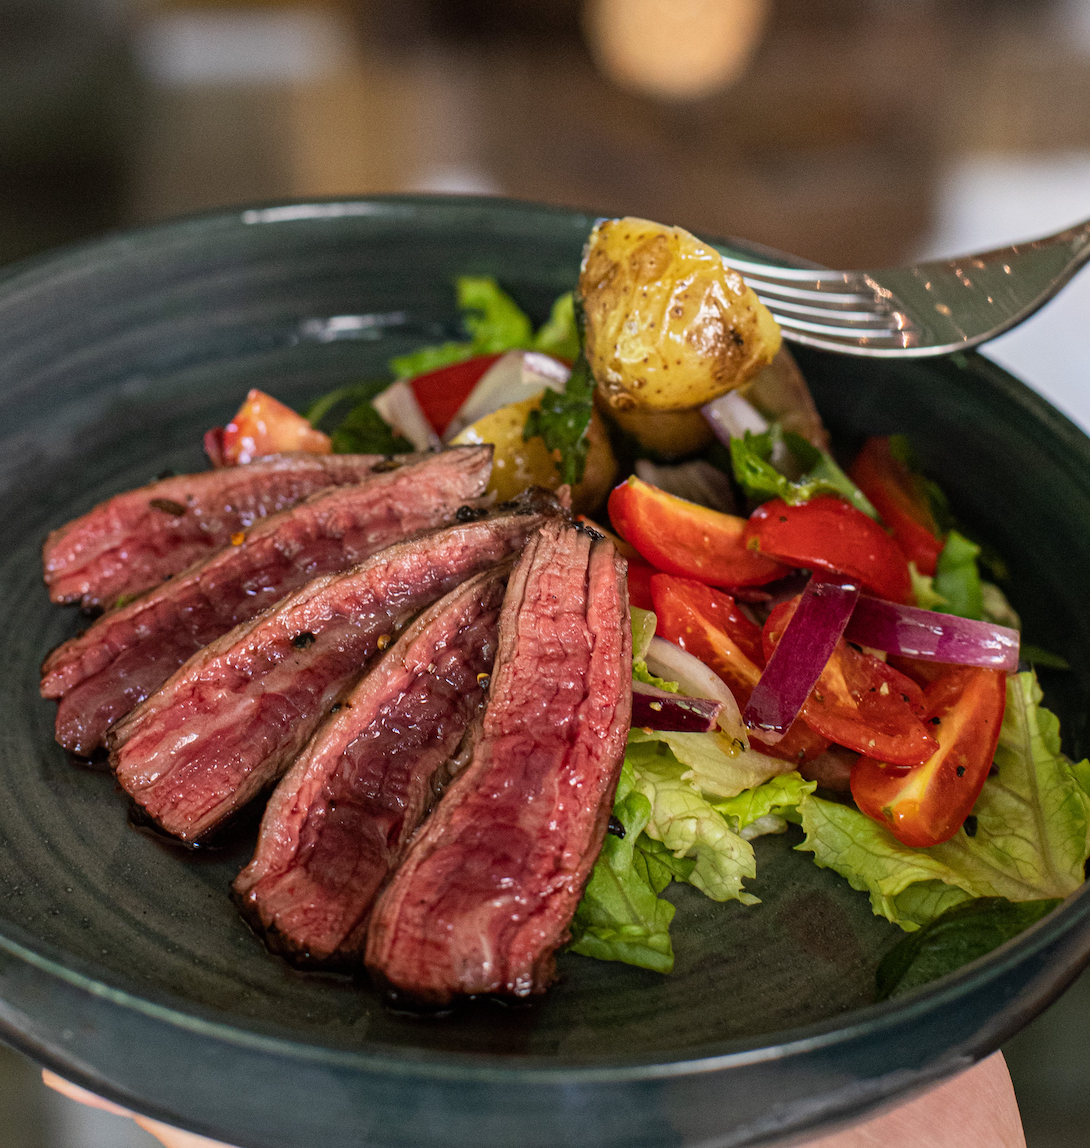 Rest the skirt steak on a cutting board before slicing against the grain. This allows the juices to redistribute yielding deliciously tender meat every time.